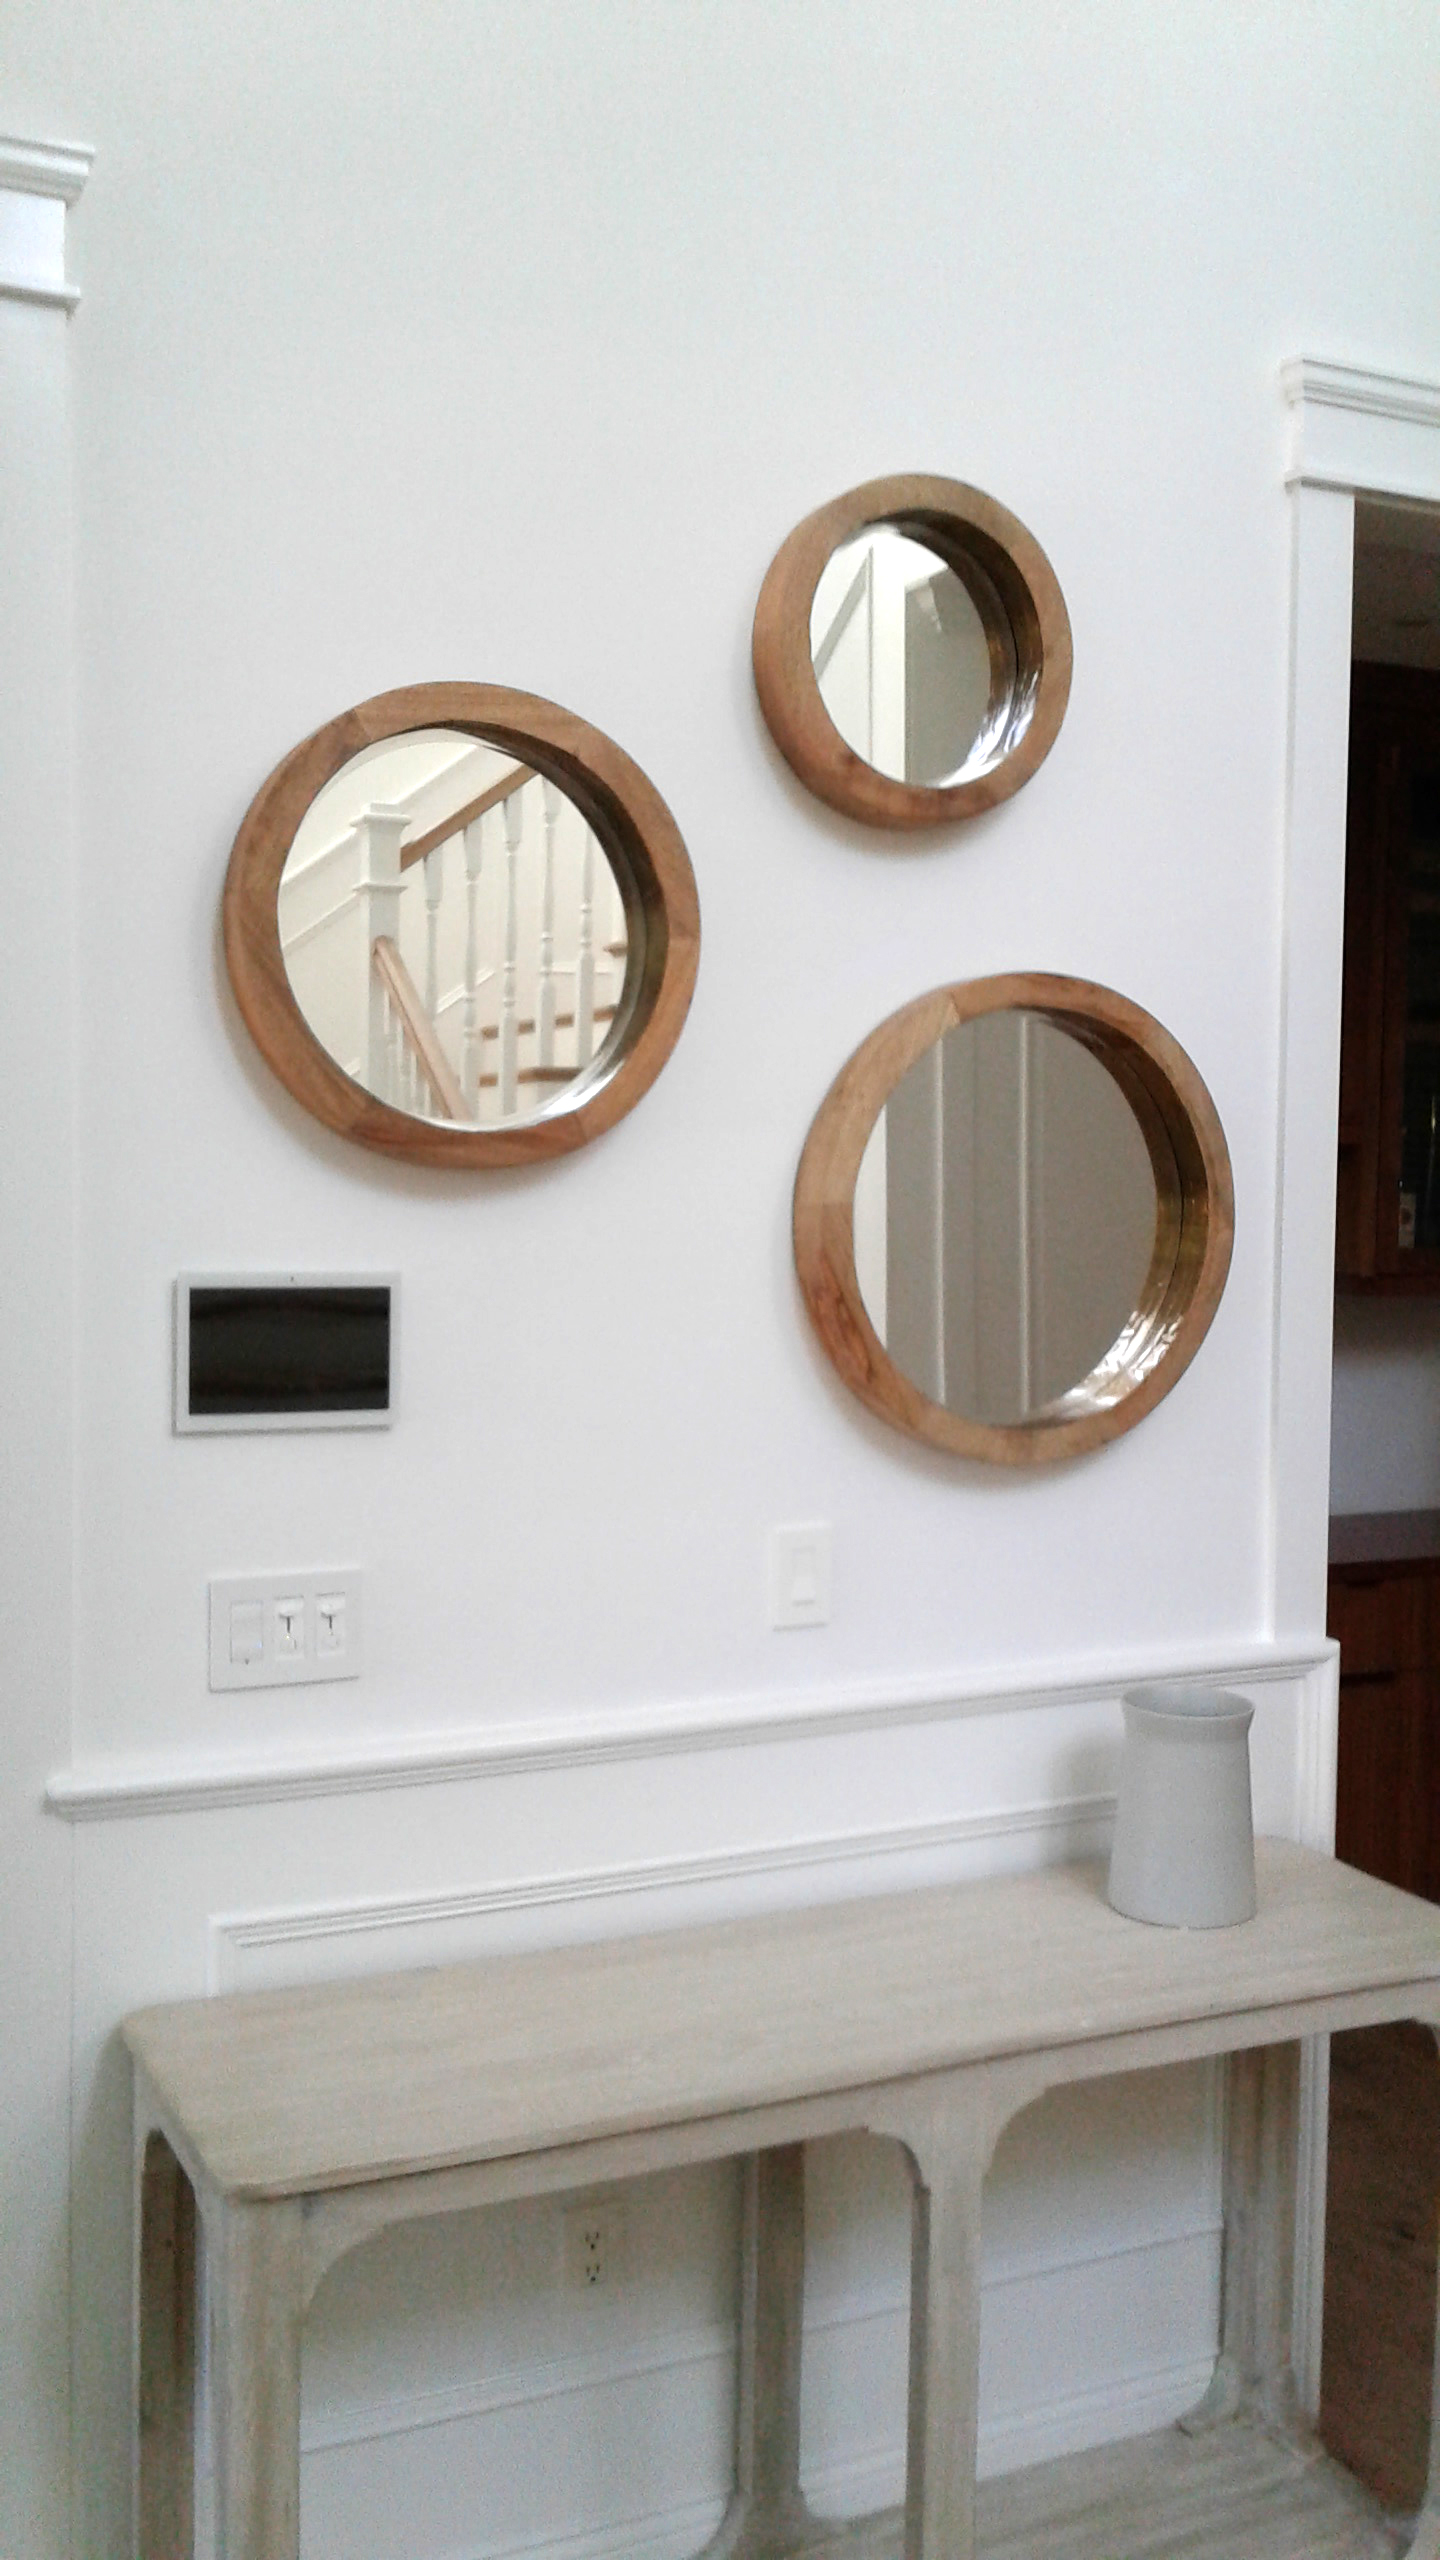 Gallery of Mirrors Mounted